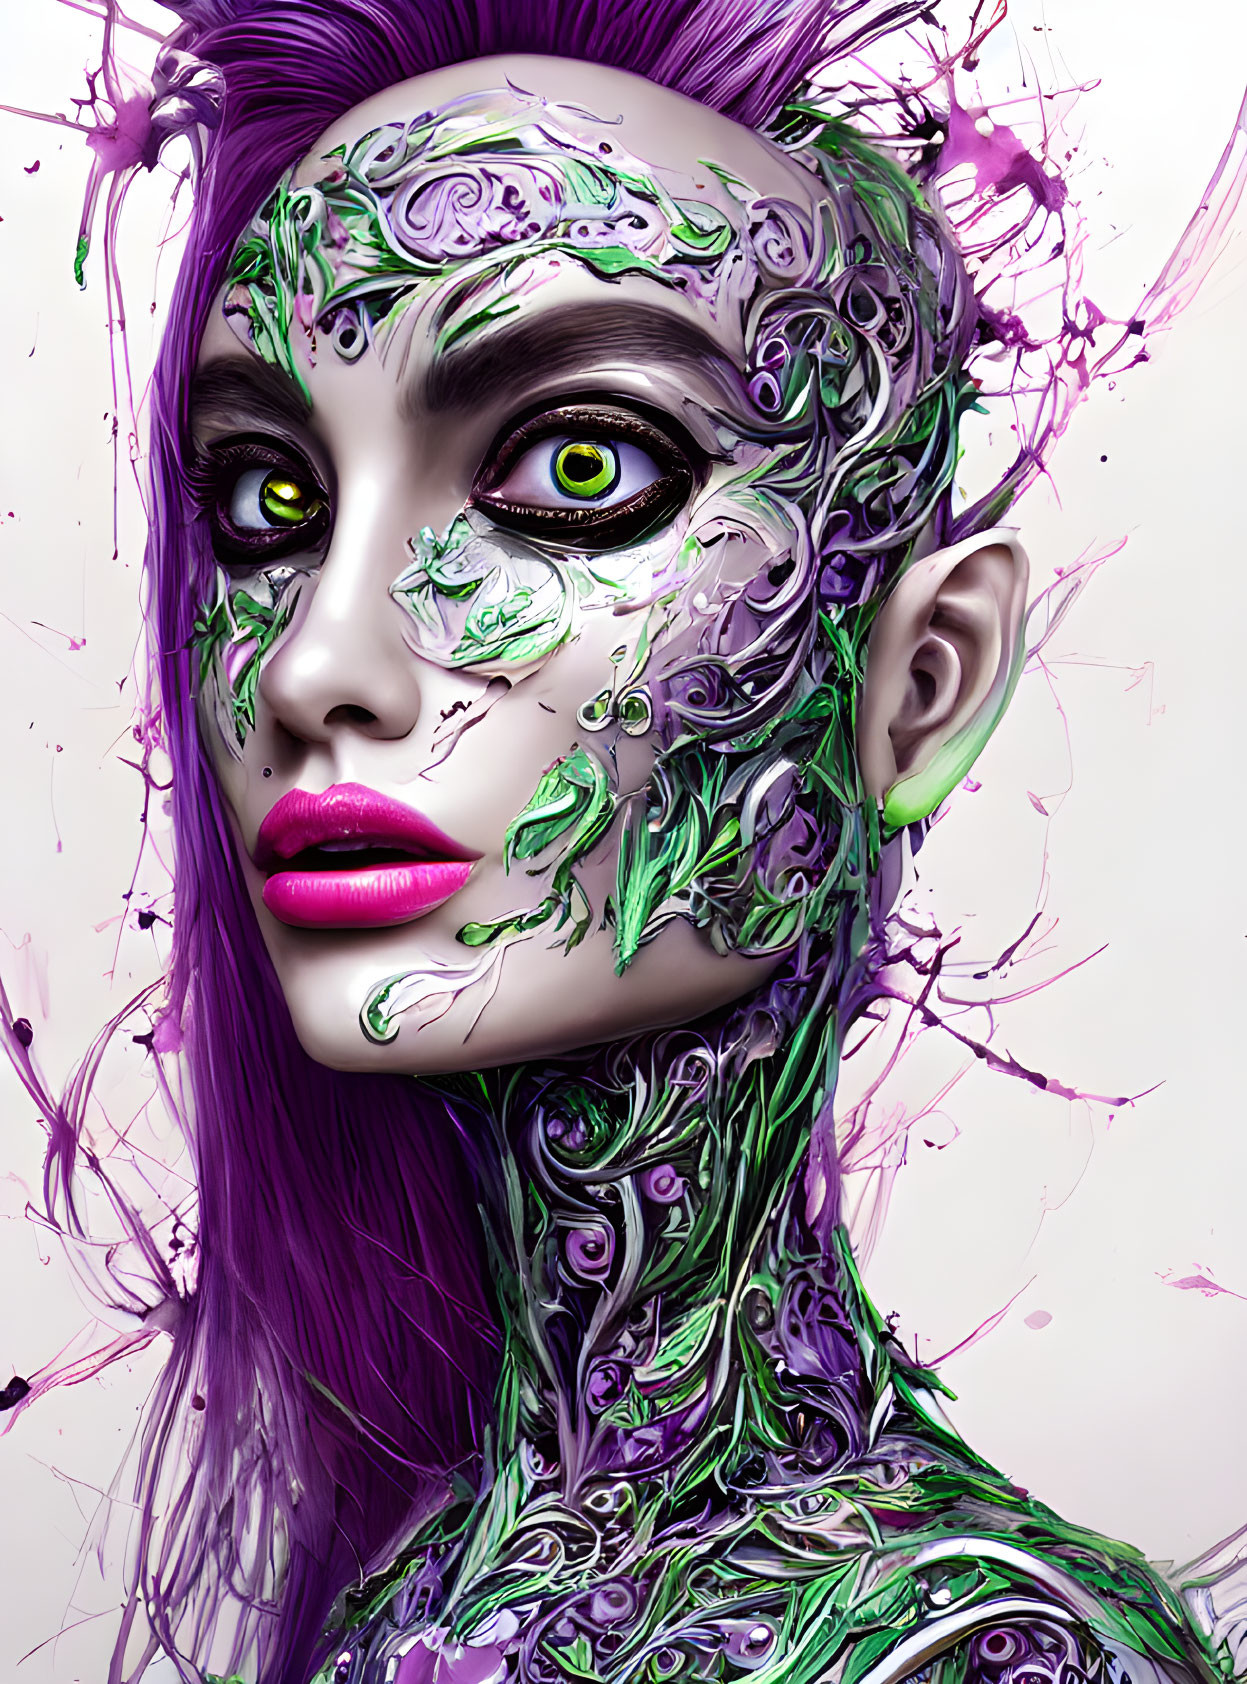 Digital artwork of female figure with green and silver vine-like patterns on face and neck in purple backdrop